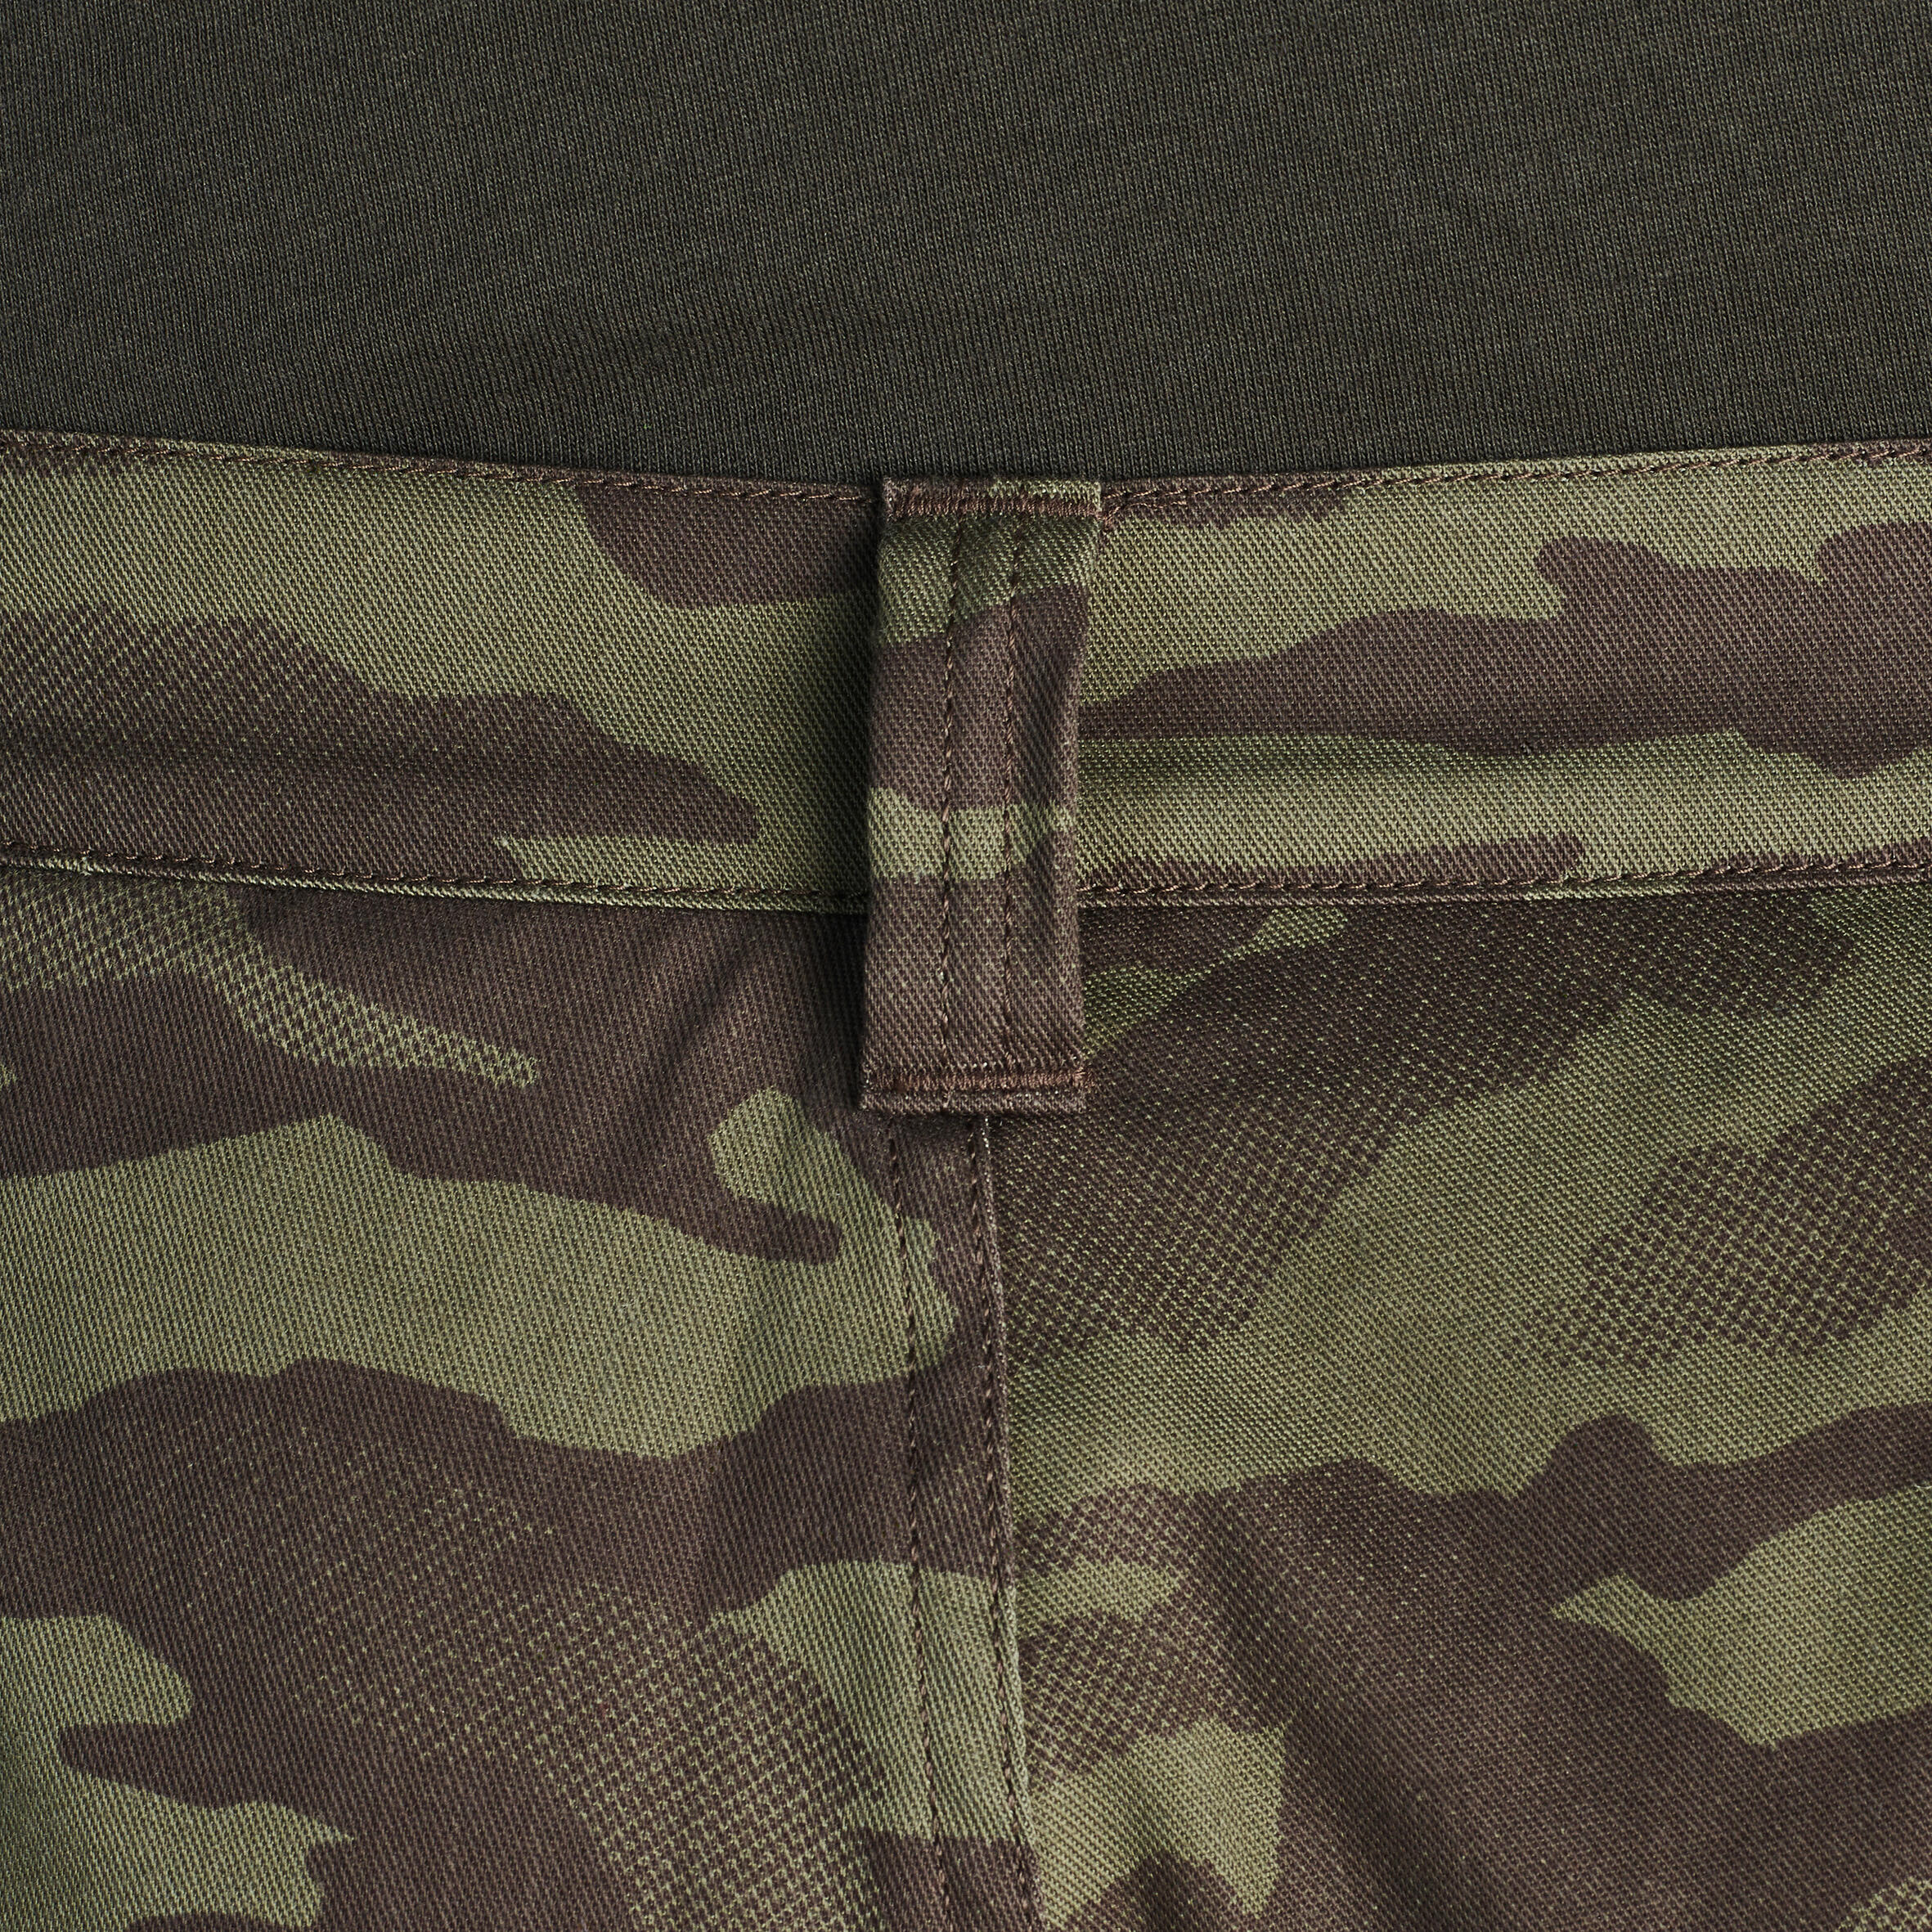 WARM HUNTING TROUSERS CAMOUFLAGE 100 6/10